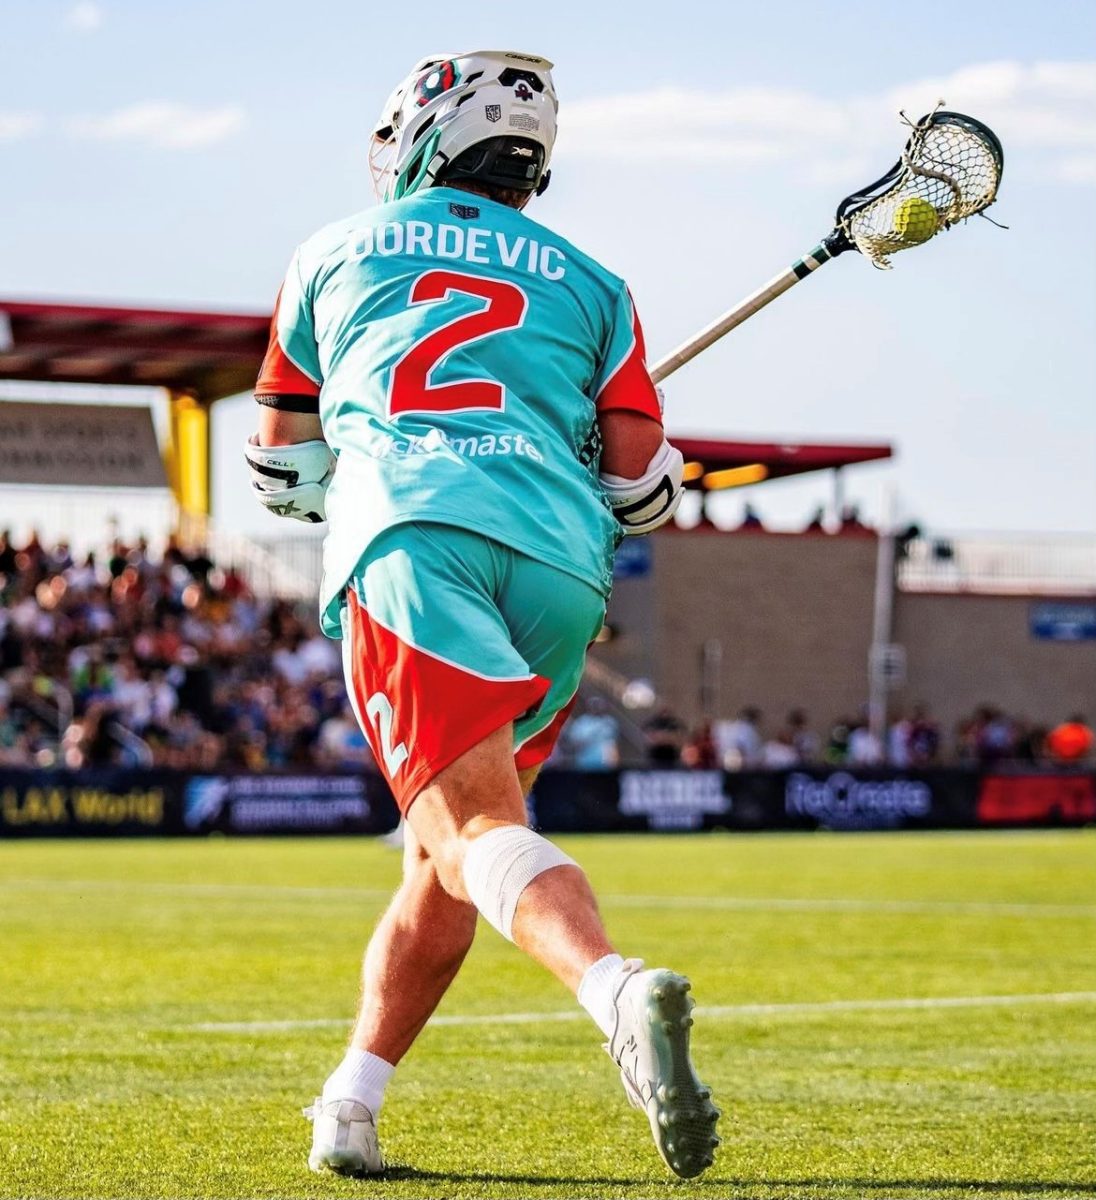 Tucker+Dordevic%2C+a+2017+Jesuit+Graduate%2C+now+plays+outdoor+lacrosse+professionally+for+the+Whipsnakes+Lacrosse+Club+after+successful+a+successful+and+proficient+lacrosse+career+in+college+%28courtesy+Tucker+Dordevic%29